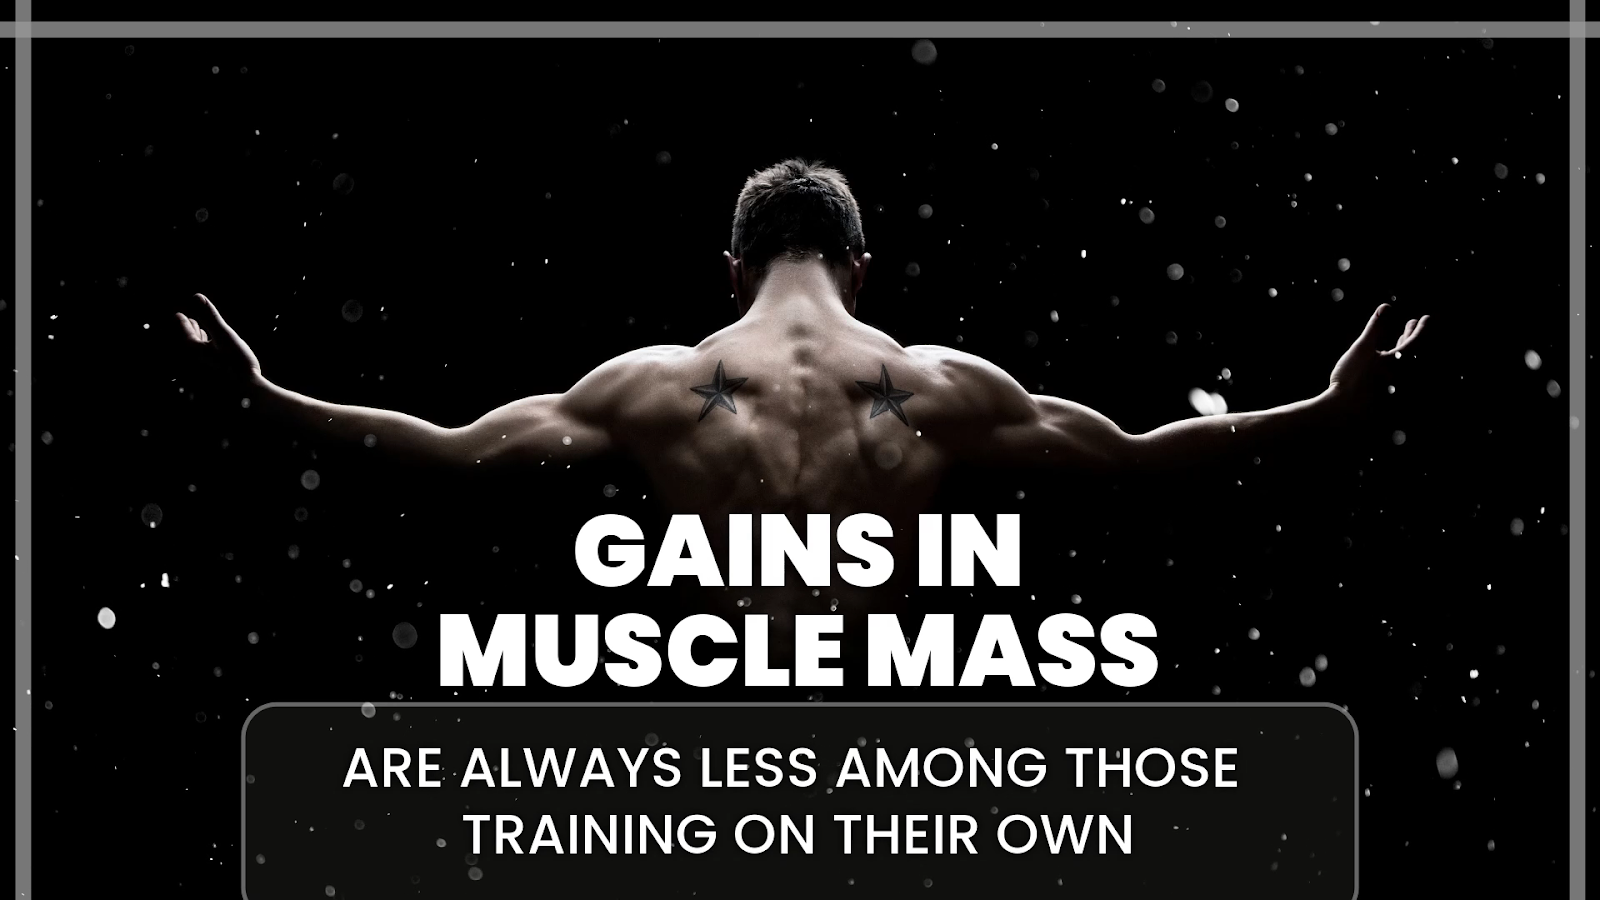 Clients who used coaching always had a higher gain in muscle mass